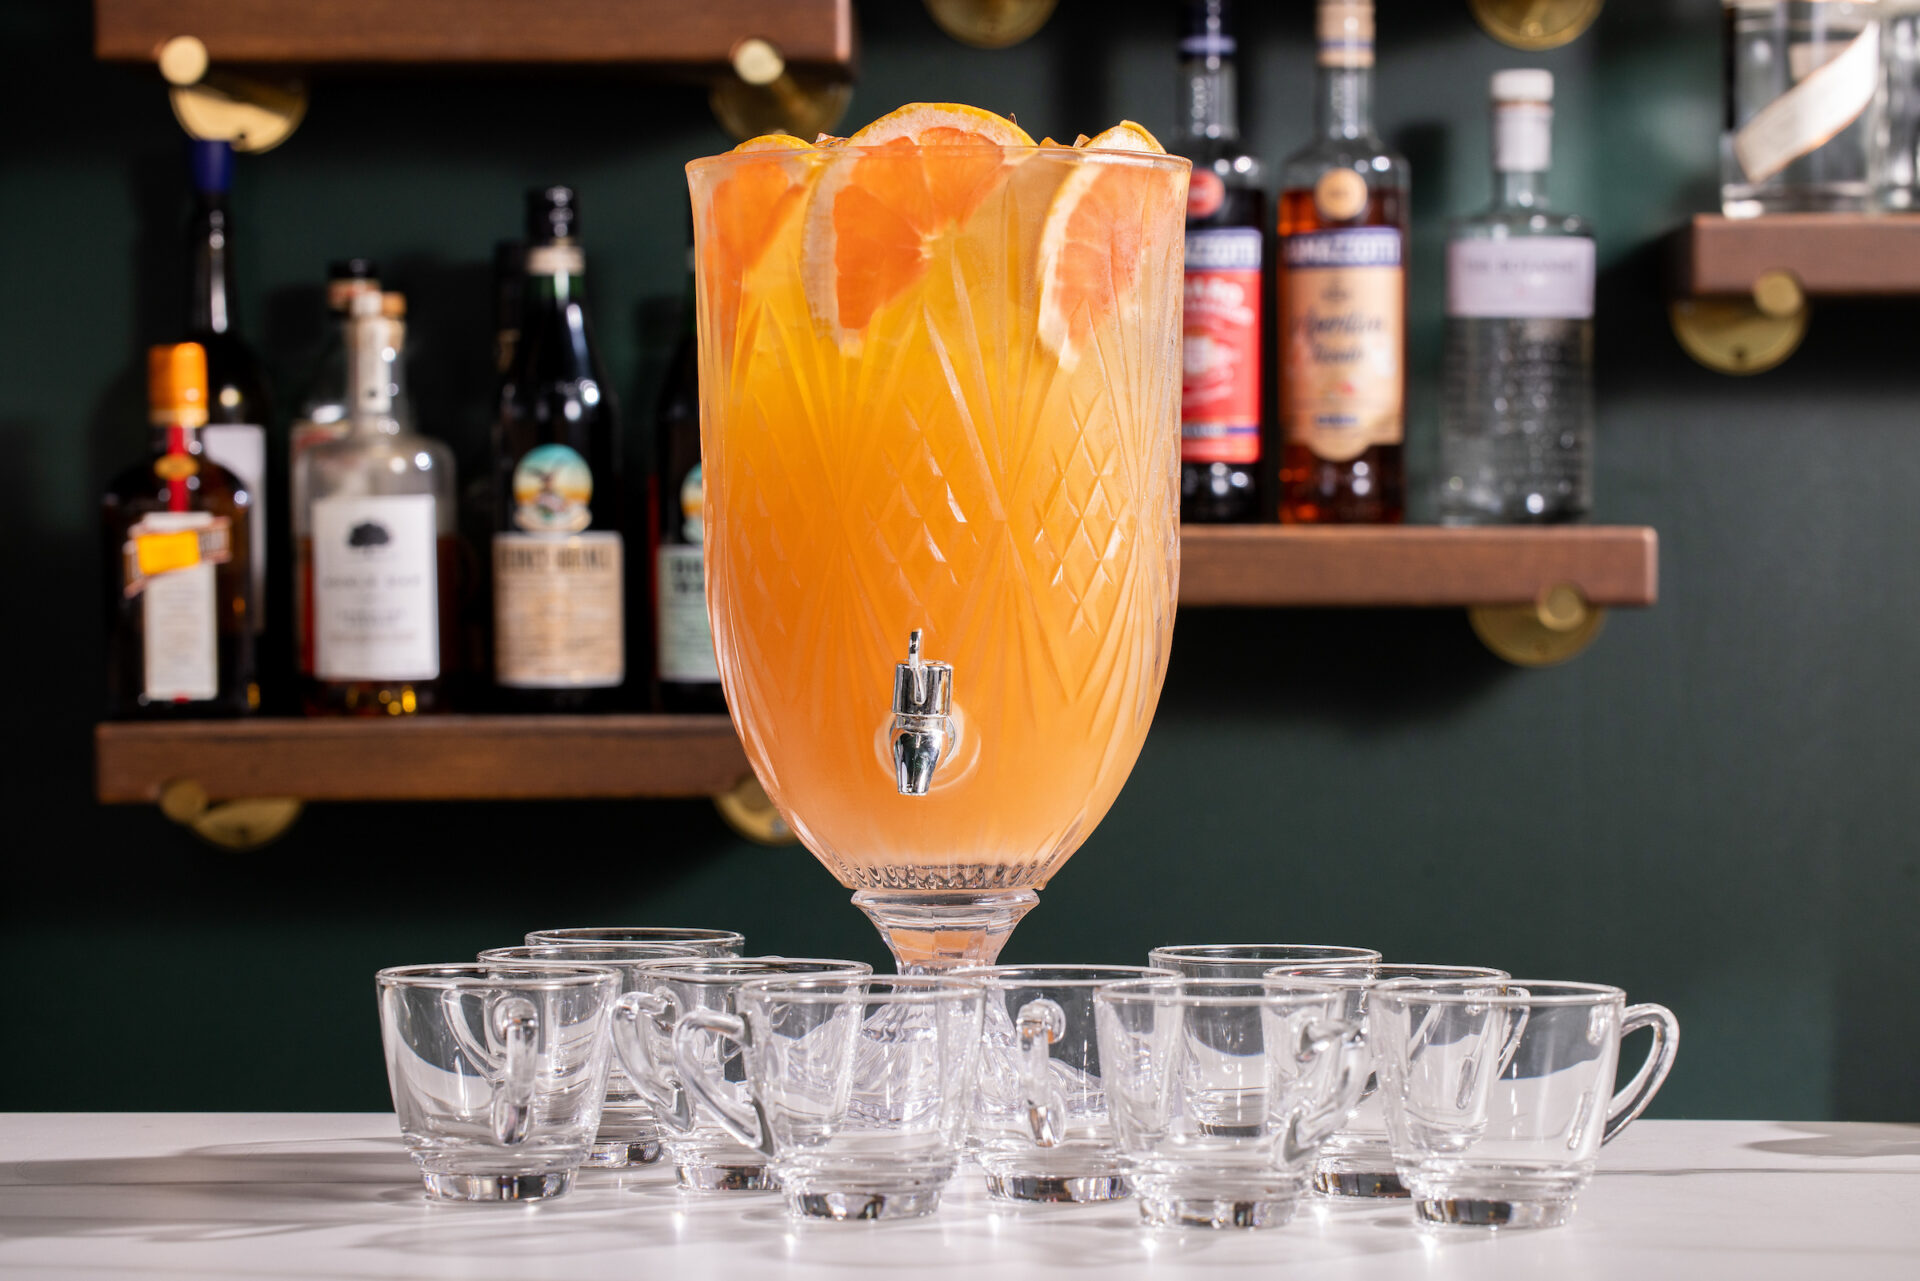 Cocktails: A pitcher sitting on a table with an orange colored punch topped with grapefruit slices. Mini glasses for pouring sit in front of the pitcher.